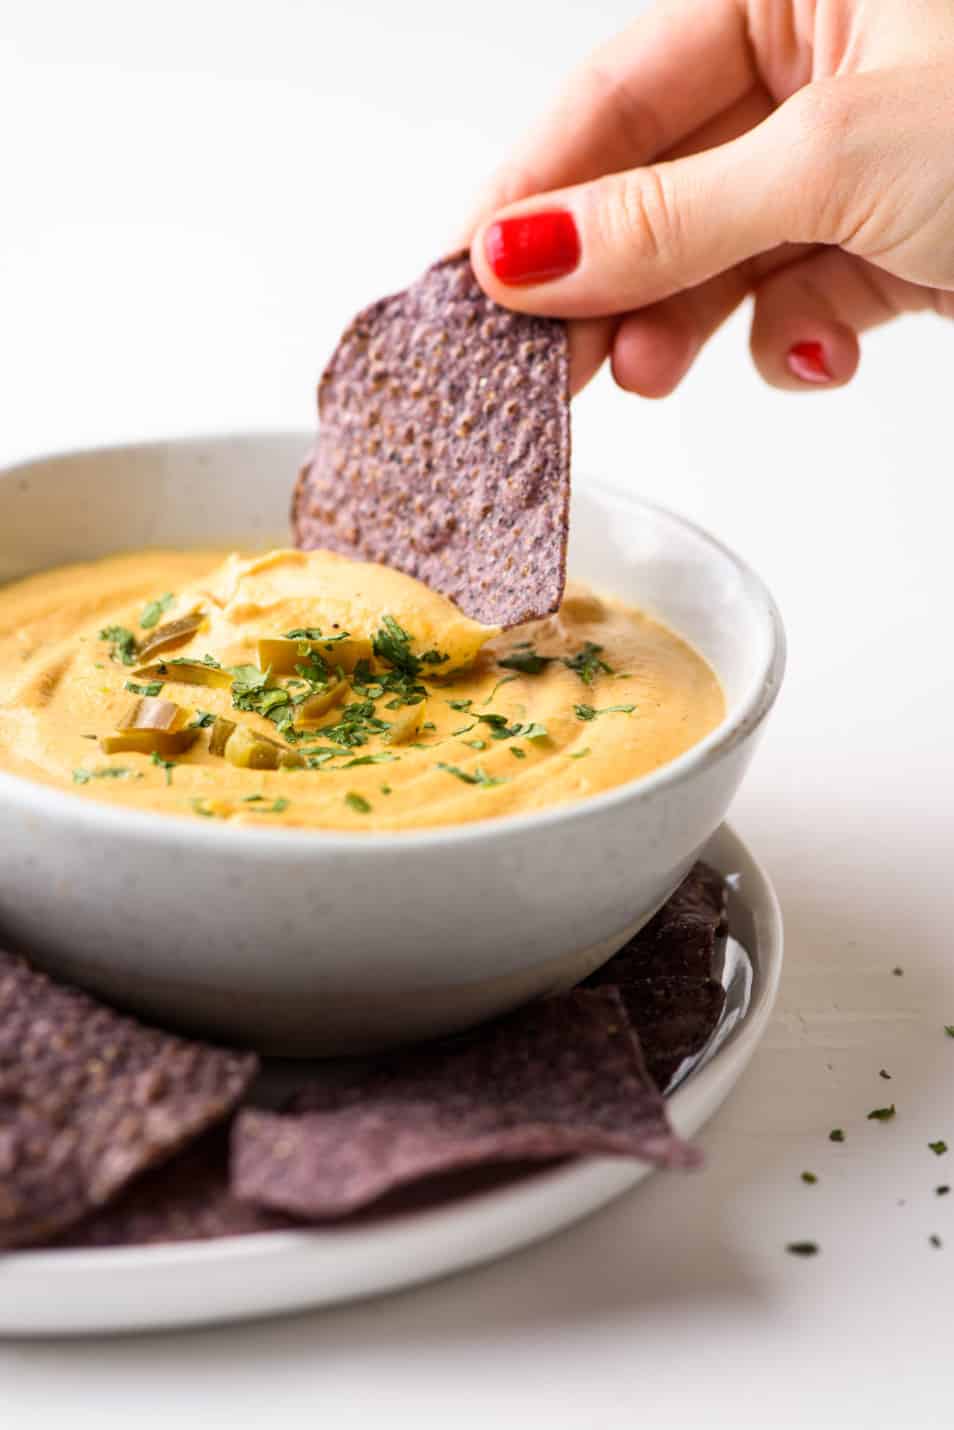 Woman's hand dipping a blue corn tortilla chip into a bowl of queso